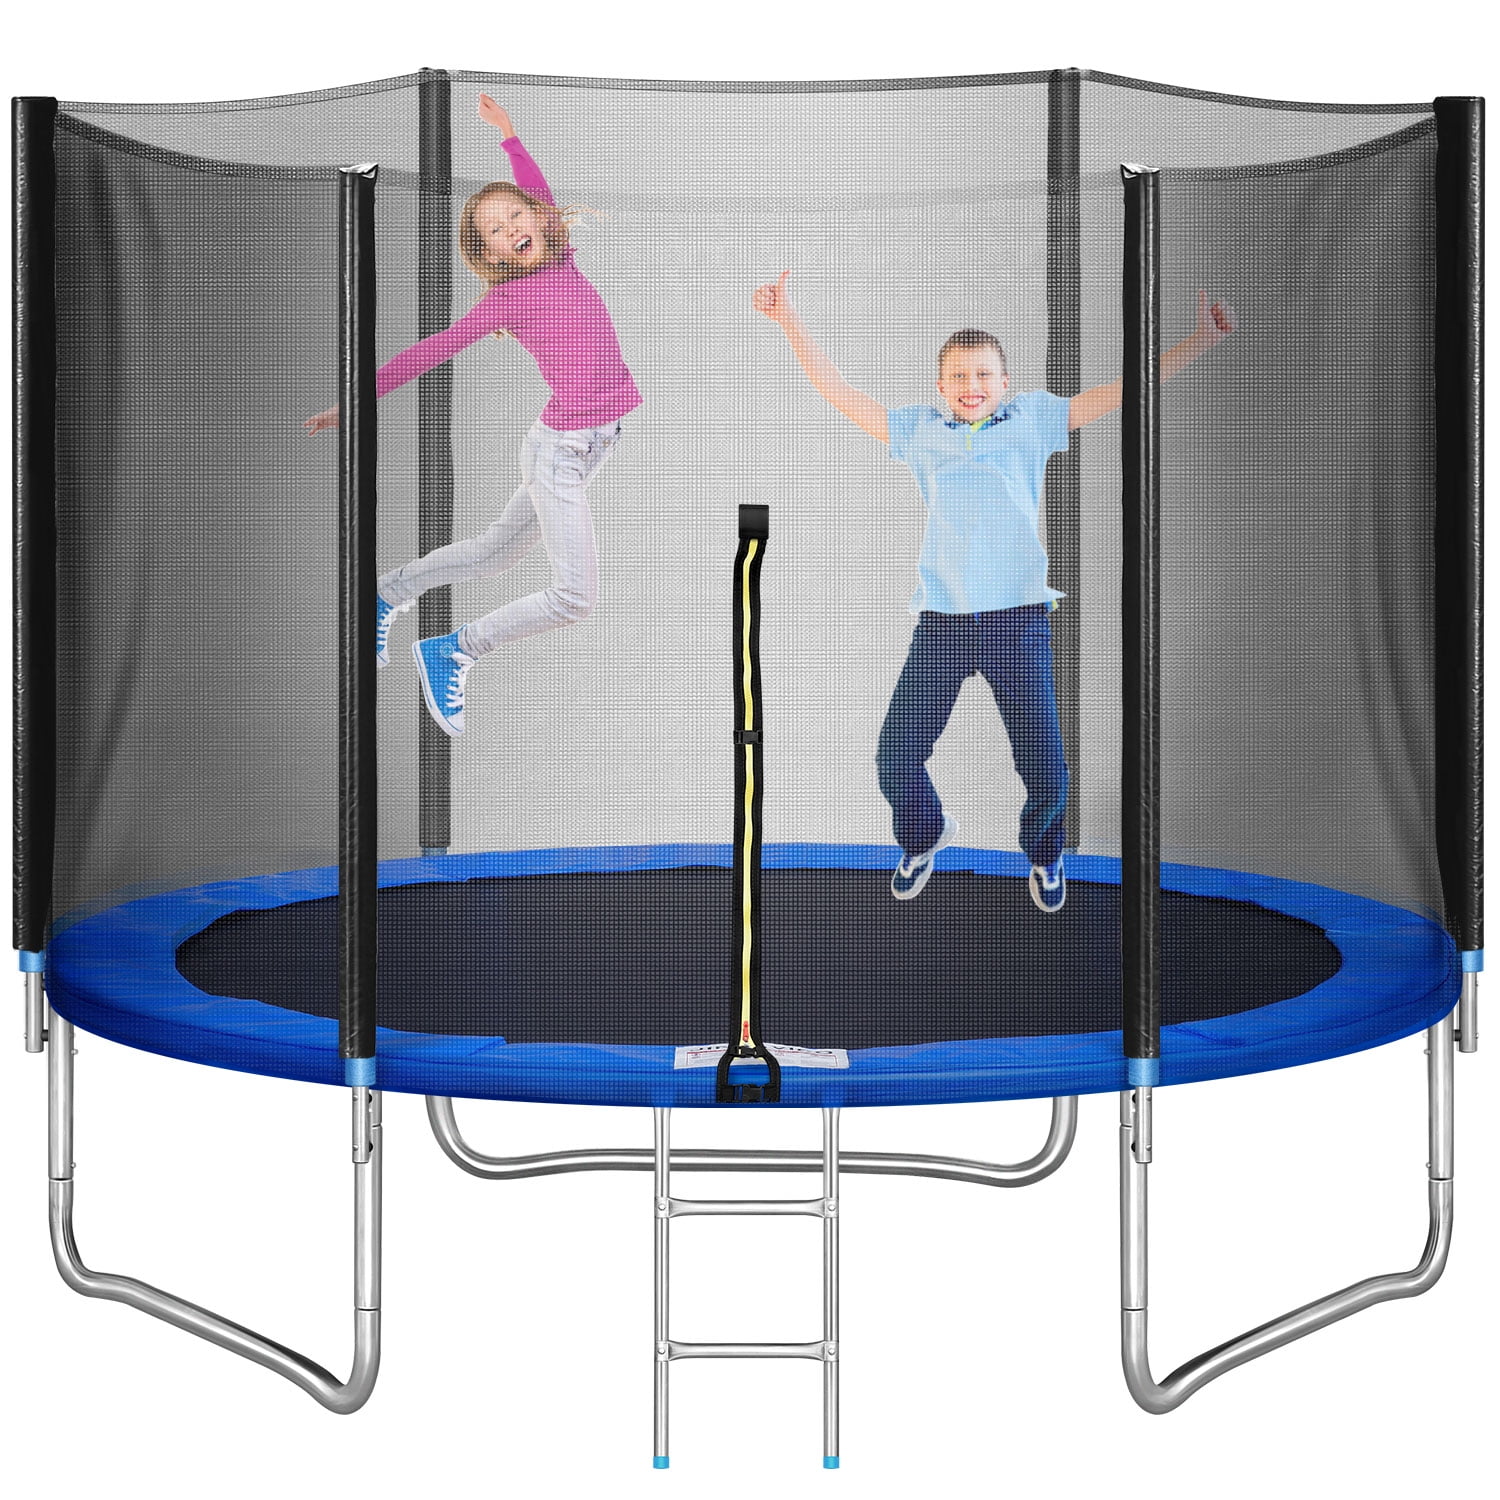 60" Round Children Trampoline with Safety Net Enclosure Fitness Toy USA New